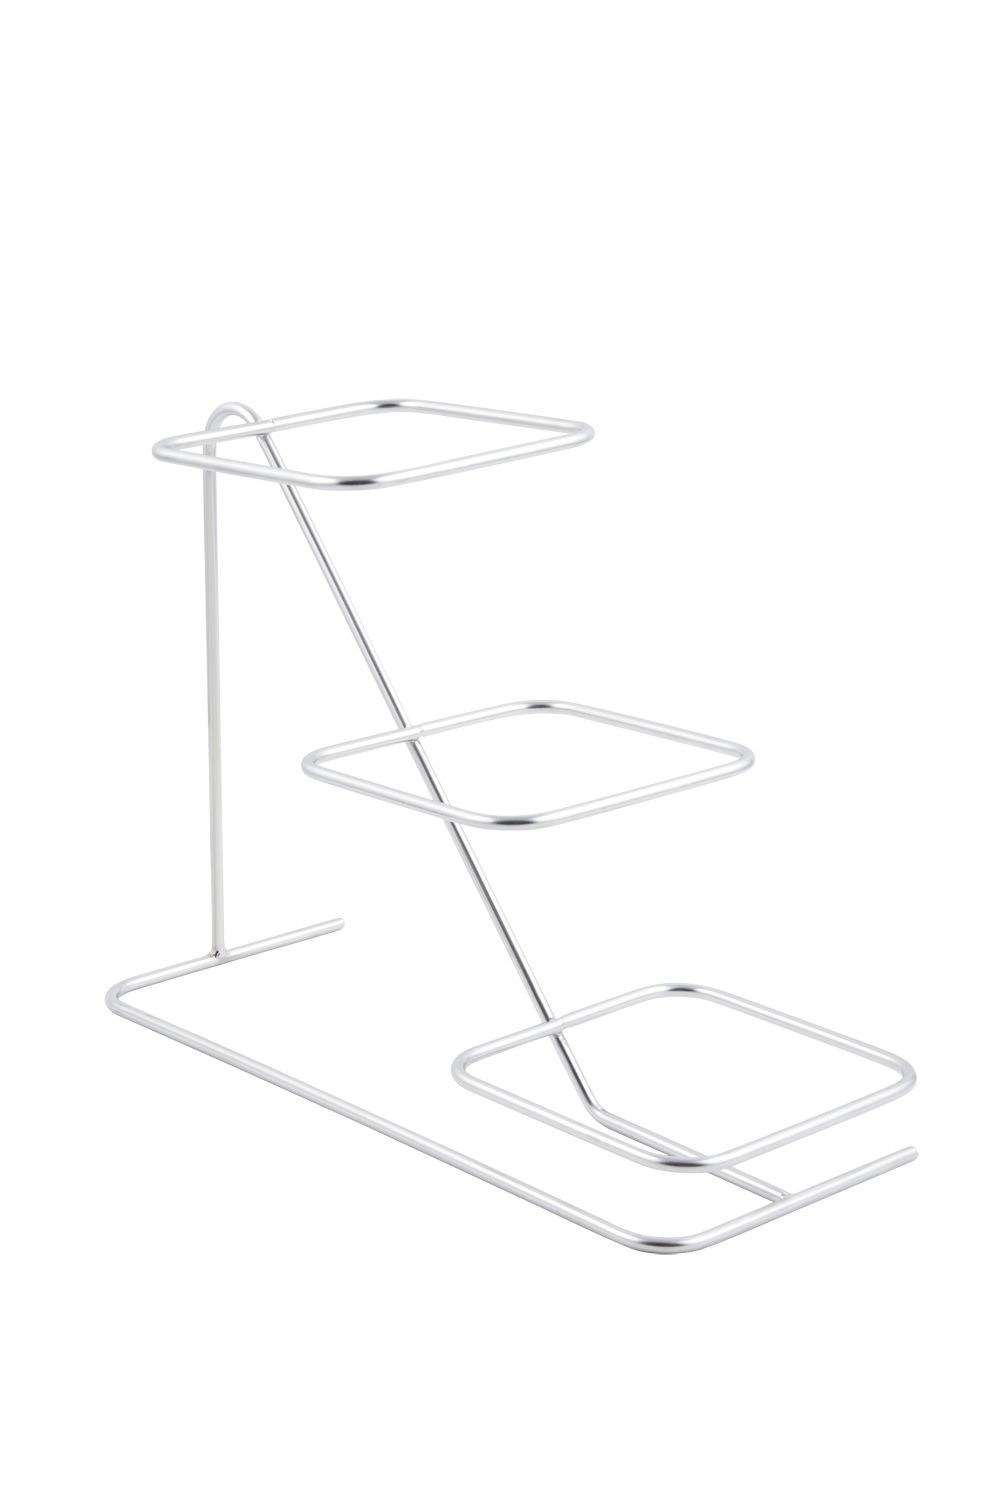 Bon Chef 7011LSS Low Side Stainless Steel Condiment Stand for 3 Salad Bowl 9110, 14 7/8" x 12 9/32"